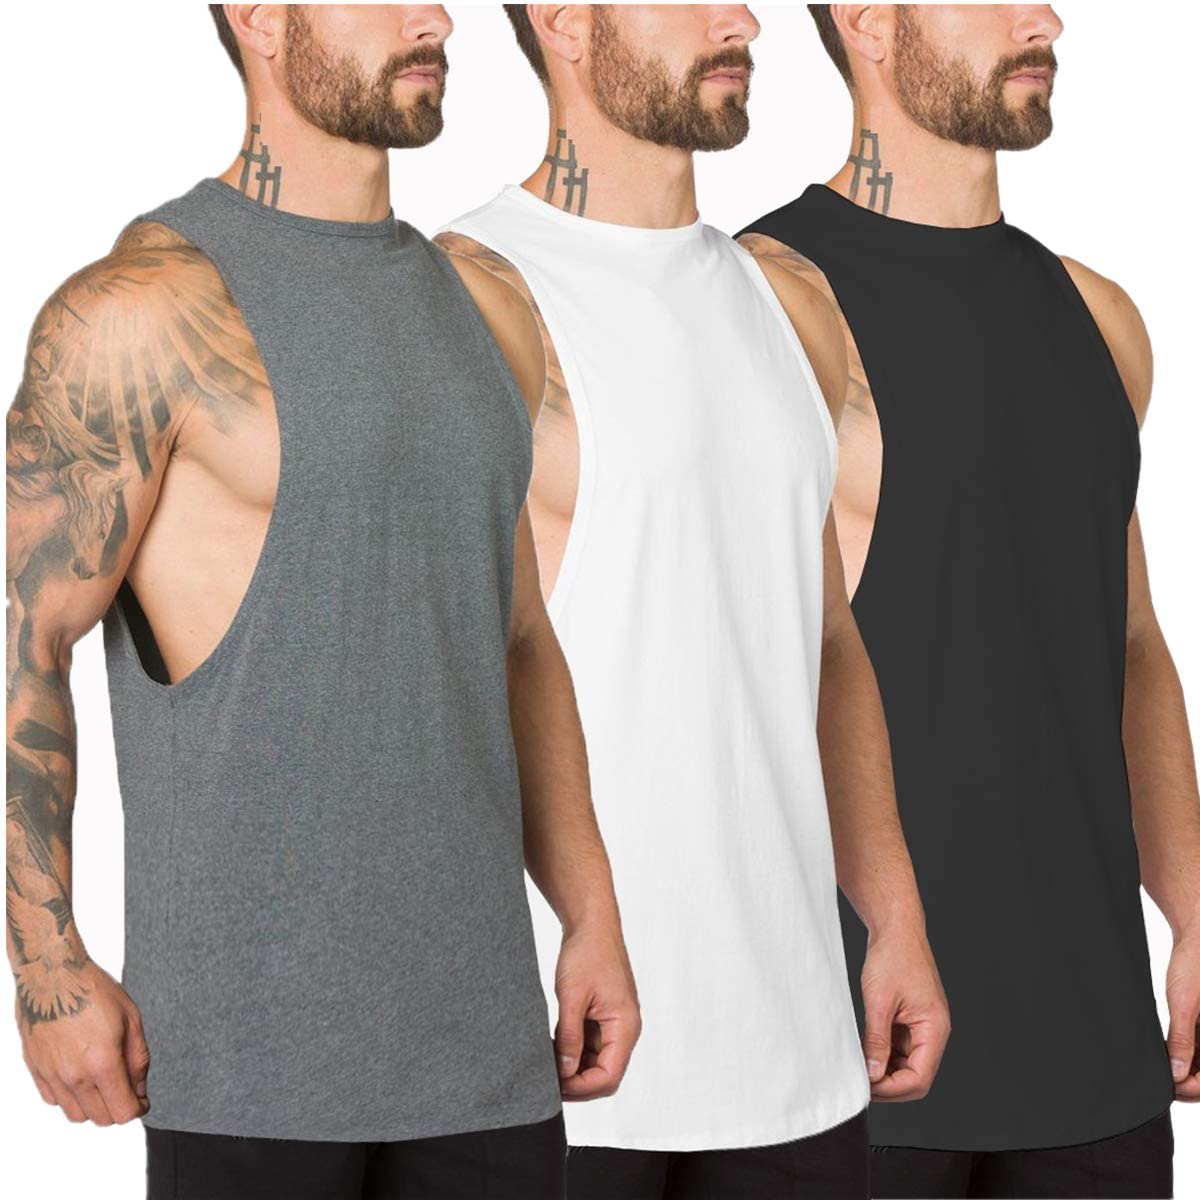 Muscle Killer 3 Pack Mens Muscle Gym Workout Stringer Tank Tops Bodybuilding Fitness T-Shirts 